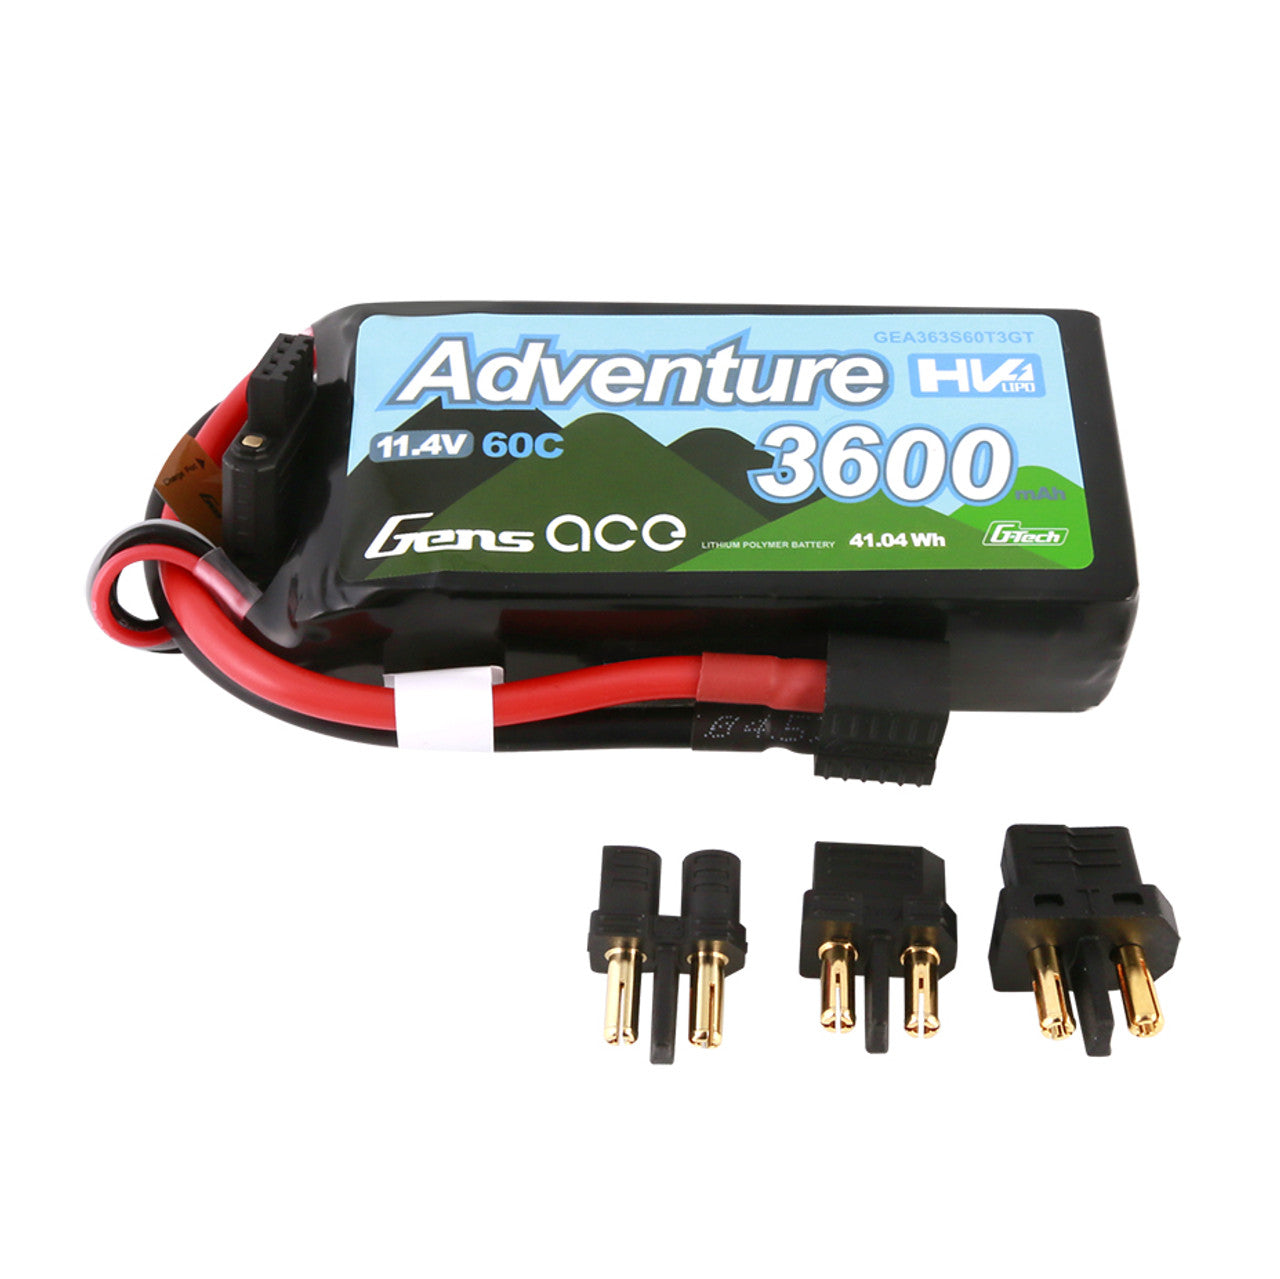 Gens Ace Adventure High Voltage 3600mAh 3S1P 11.4V 60C G-Tech Lipo Battery With Deans And XT60 Adapter